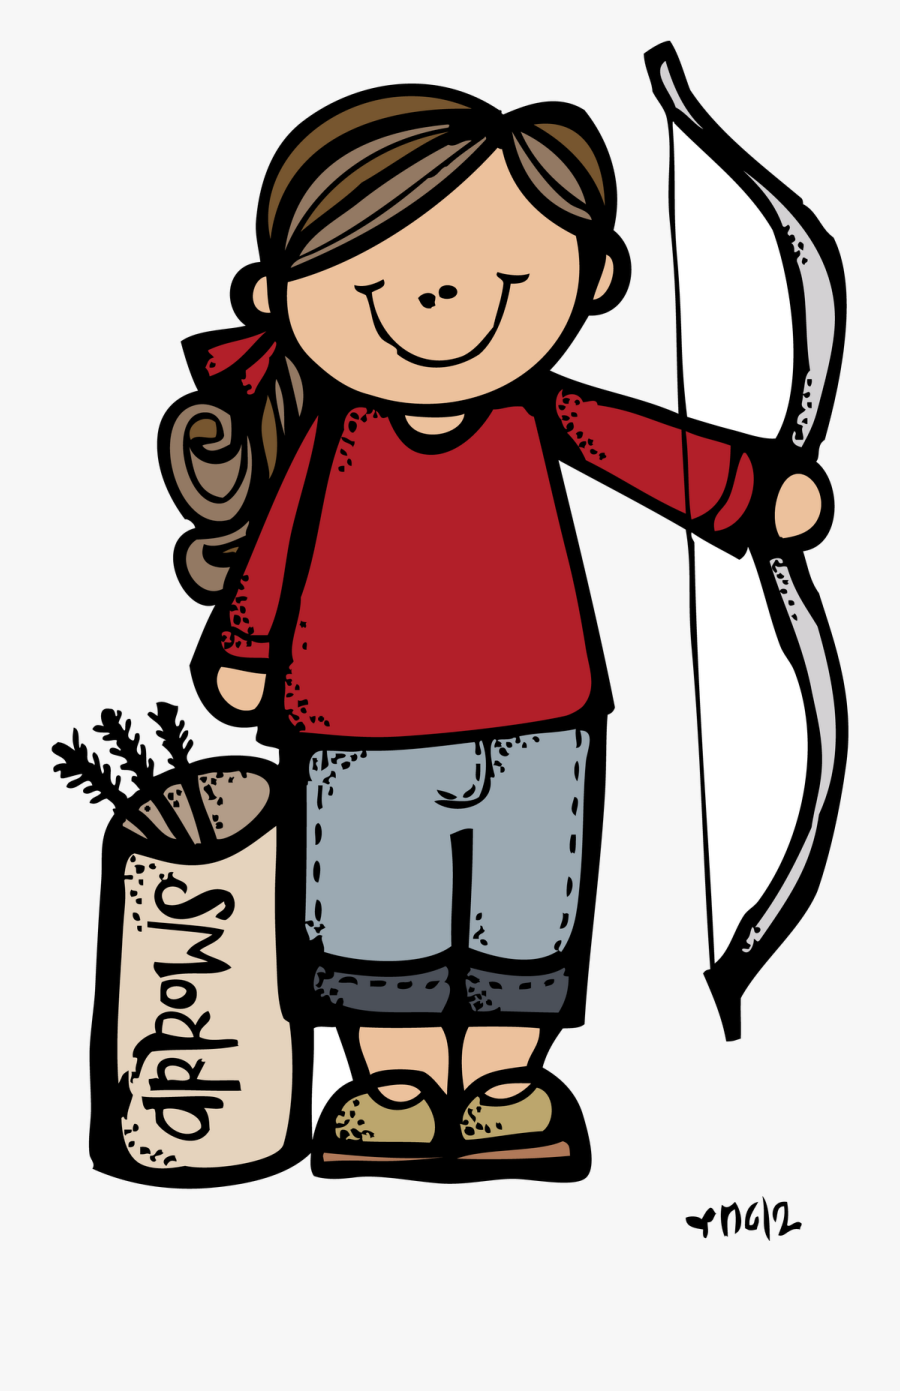 Camping Girl Clipart Black And White, Transparent Clipart